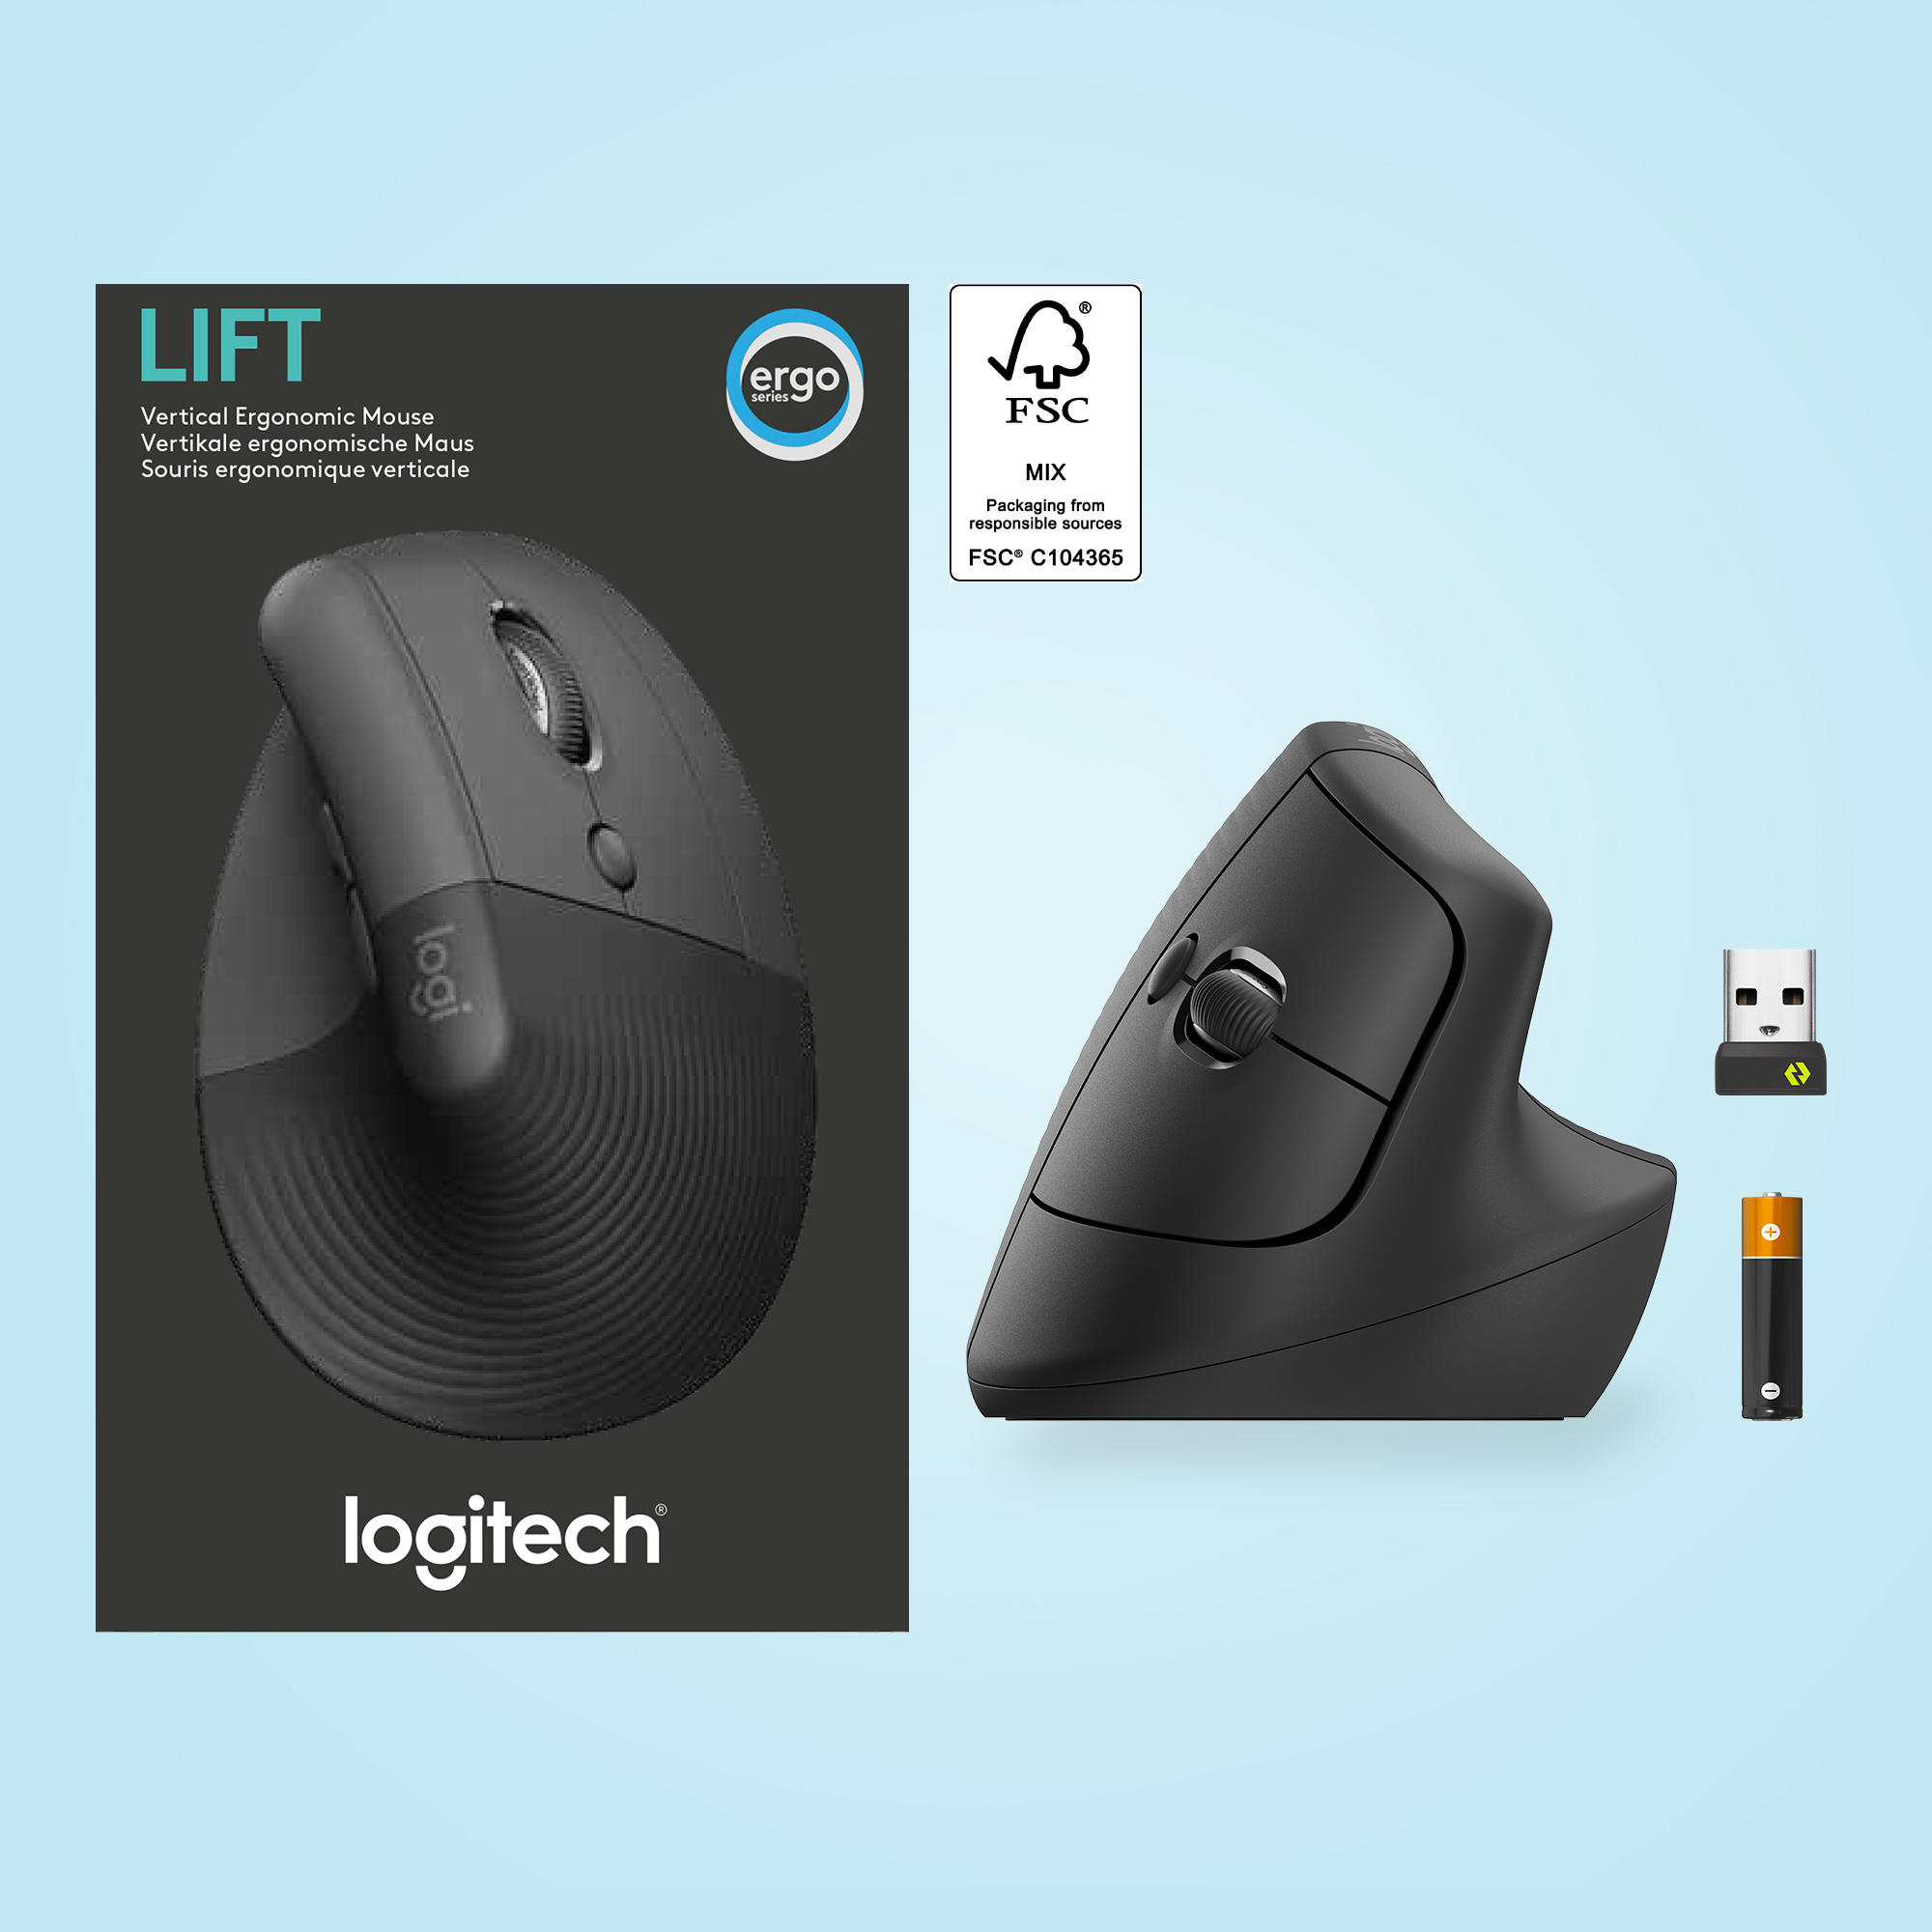 Logitech Lift for Business - vertical mouse - Bluetooth, 2.4 GHz - off-white